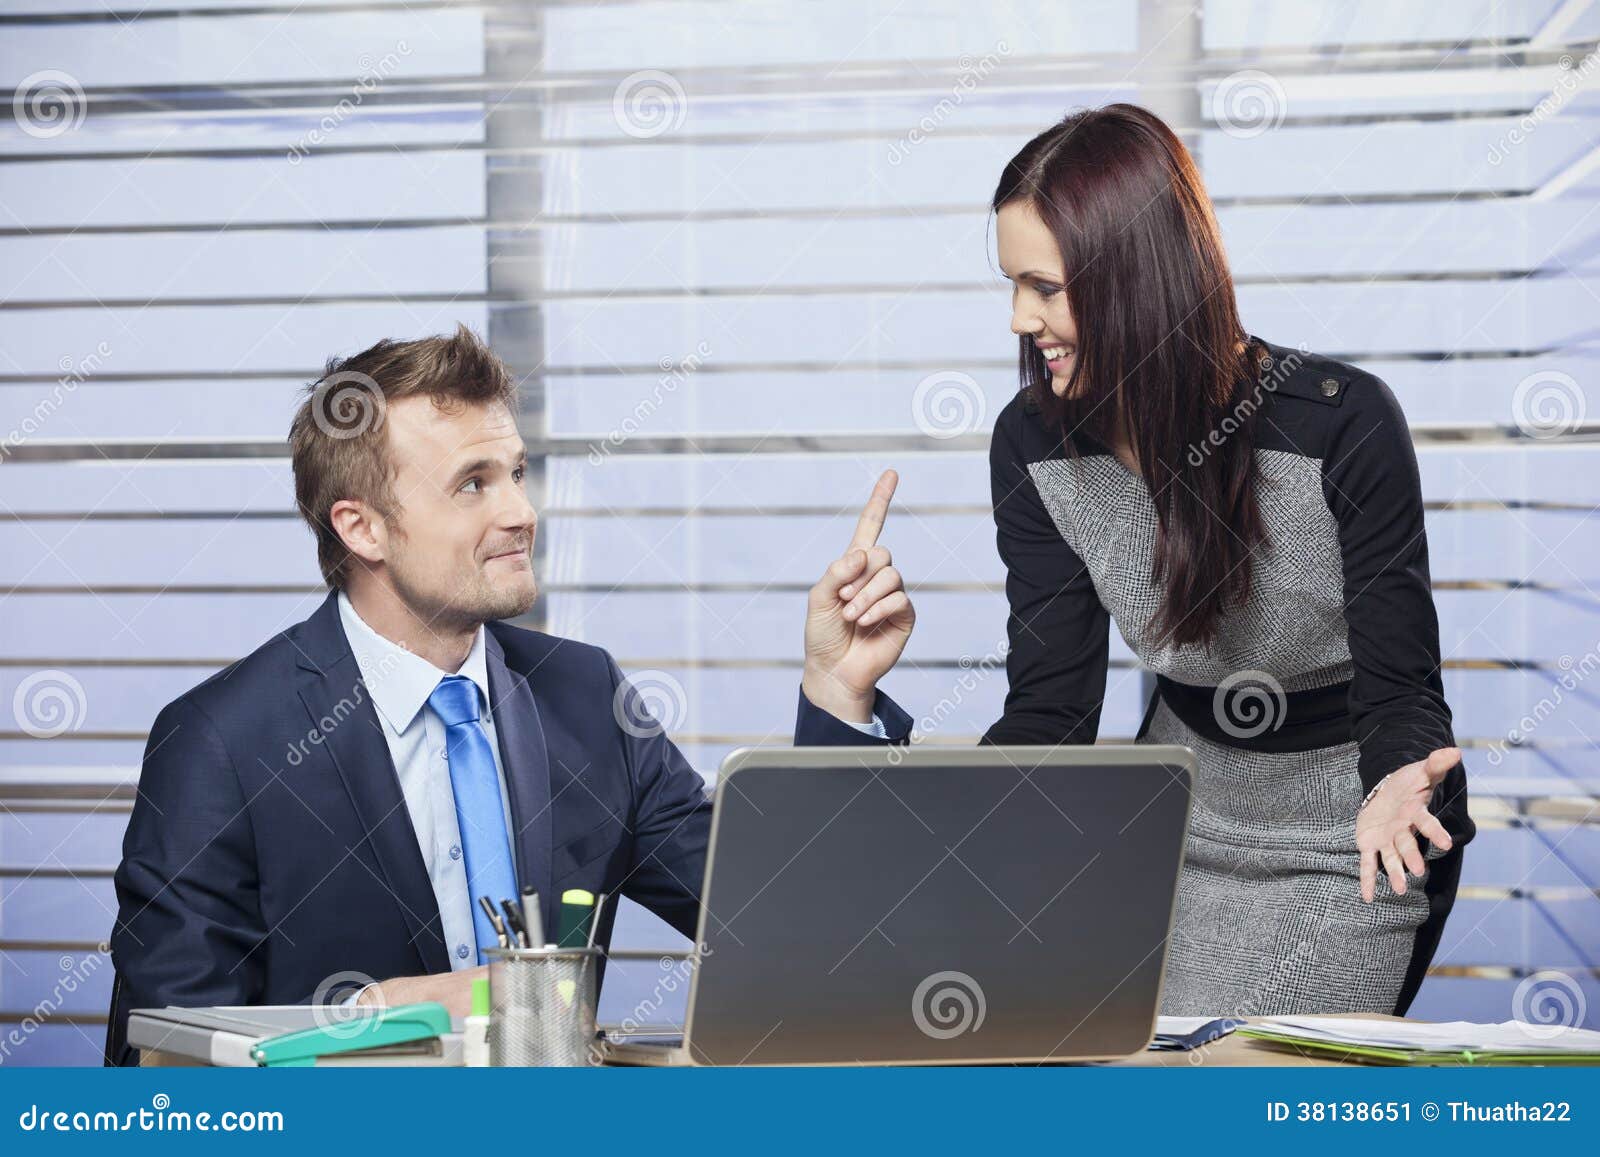 Business Woman Flirting With A Man In The Office Stock